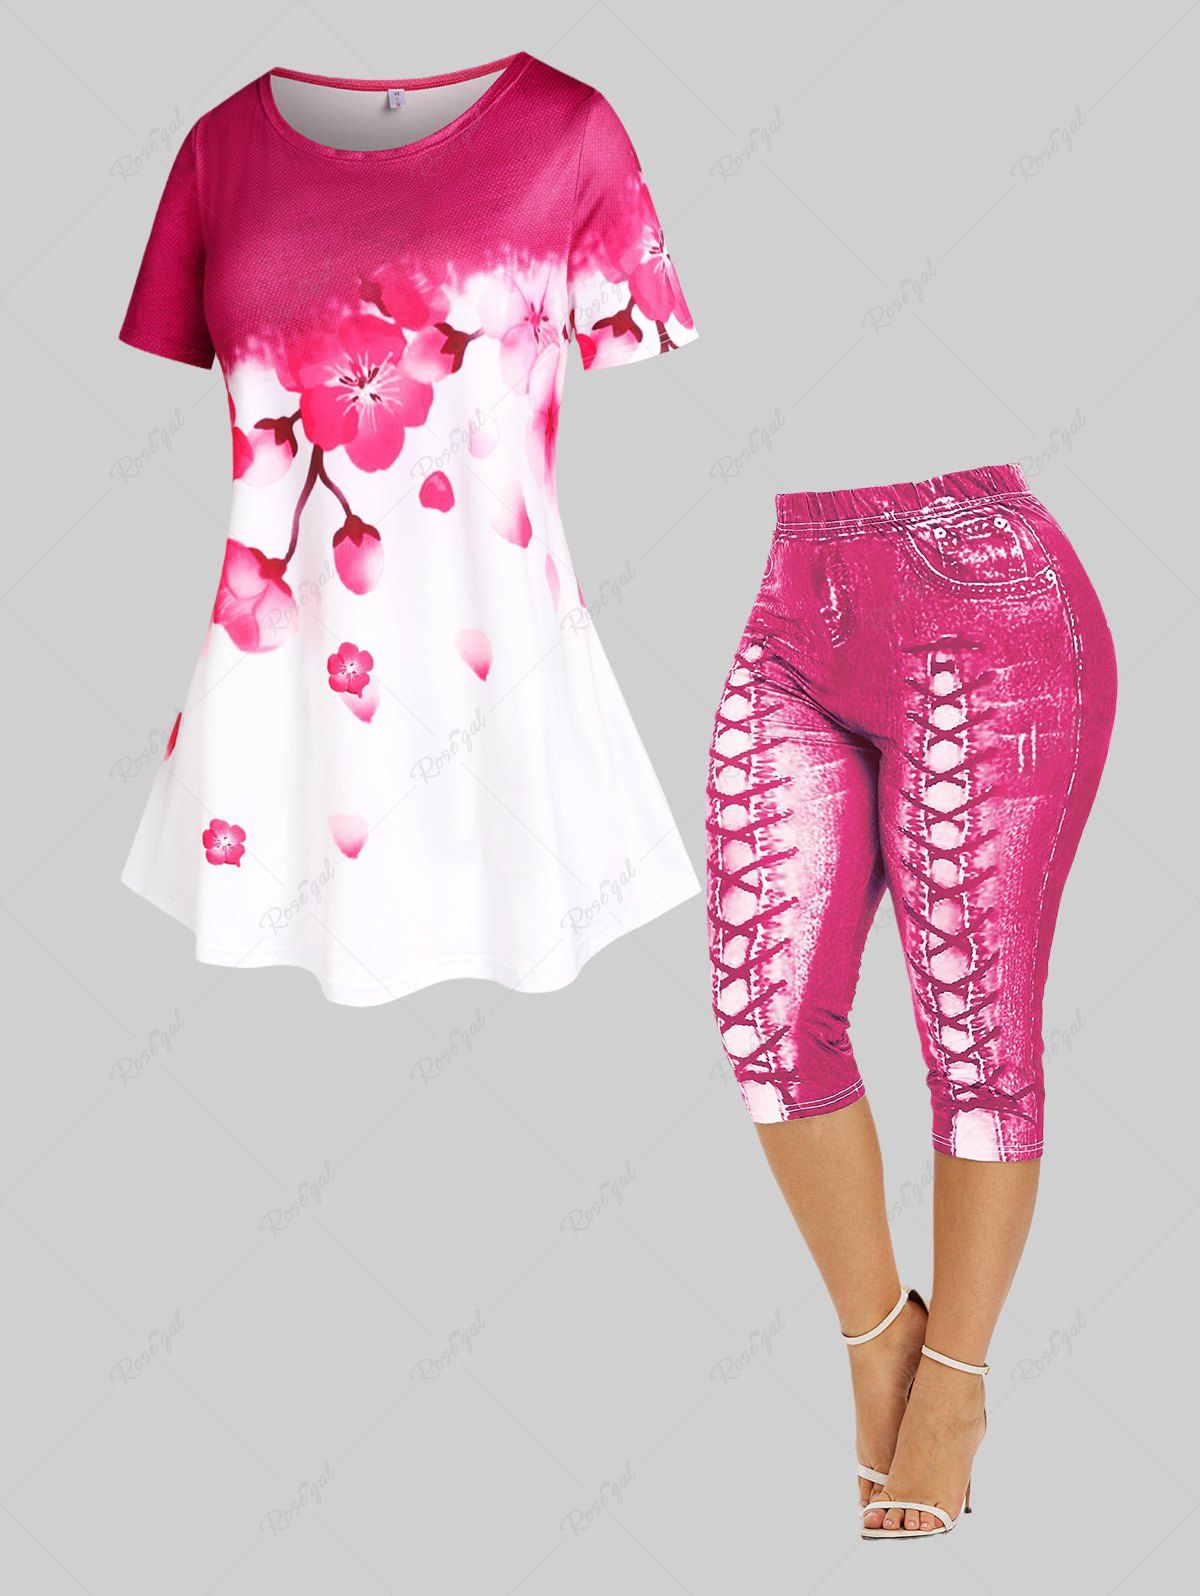 Shop Sakura Blossom Swing Top and Leggings Plus Size Summer Outfit  